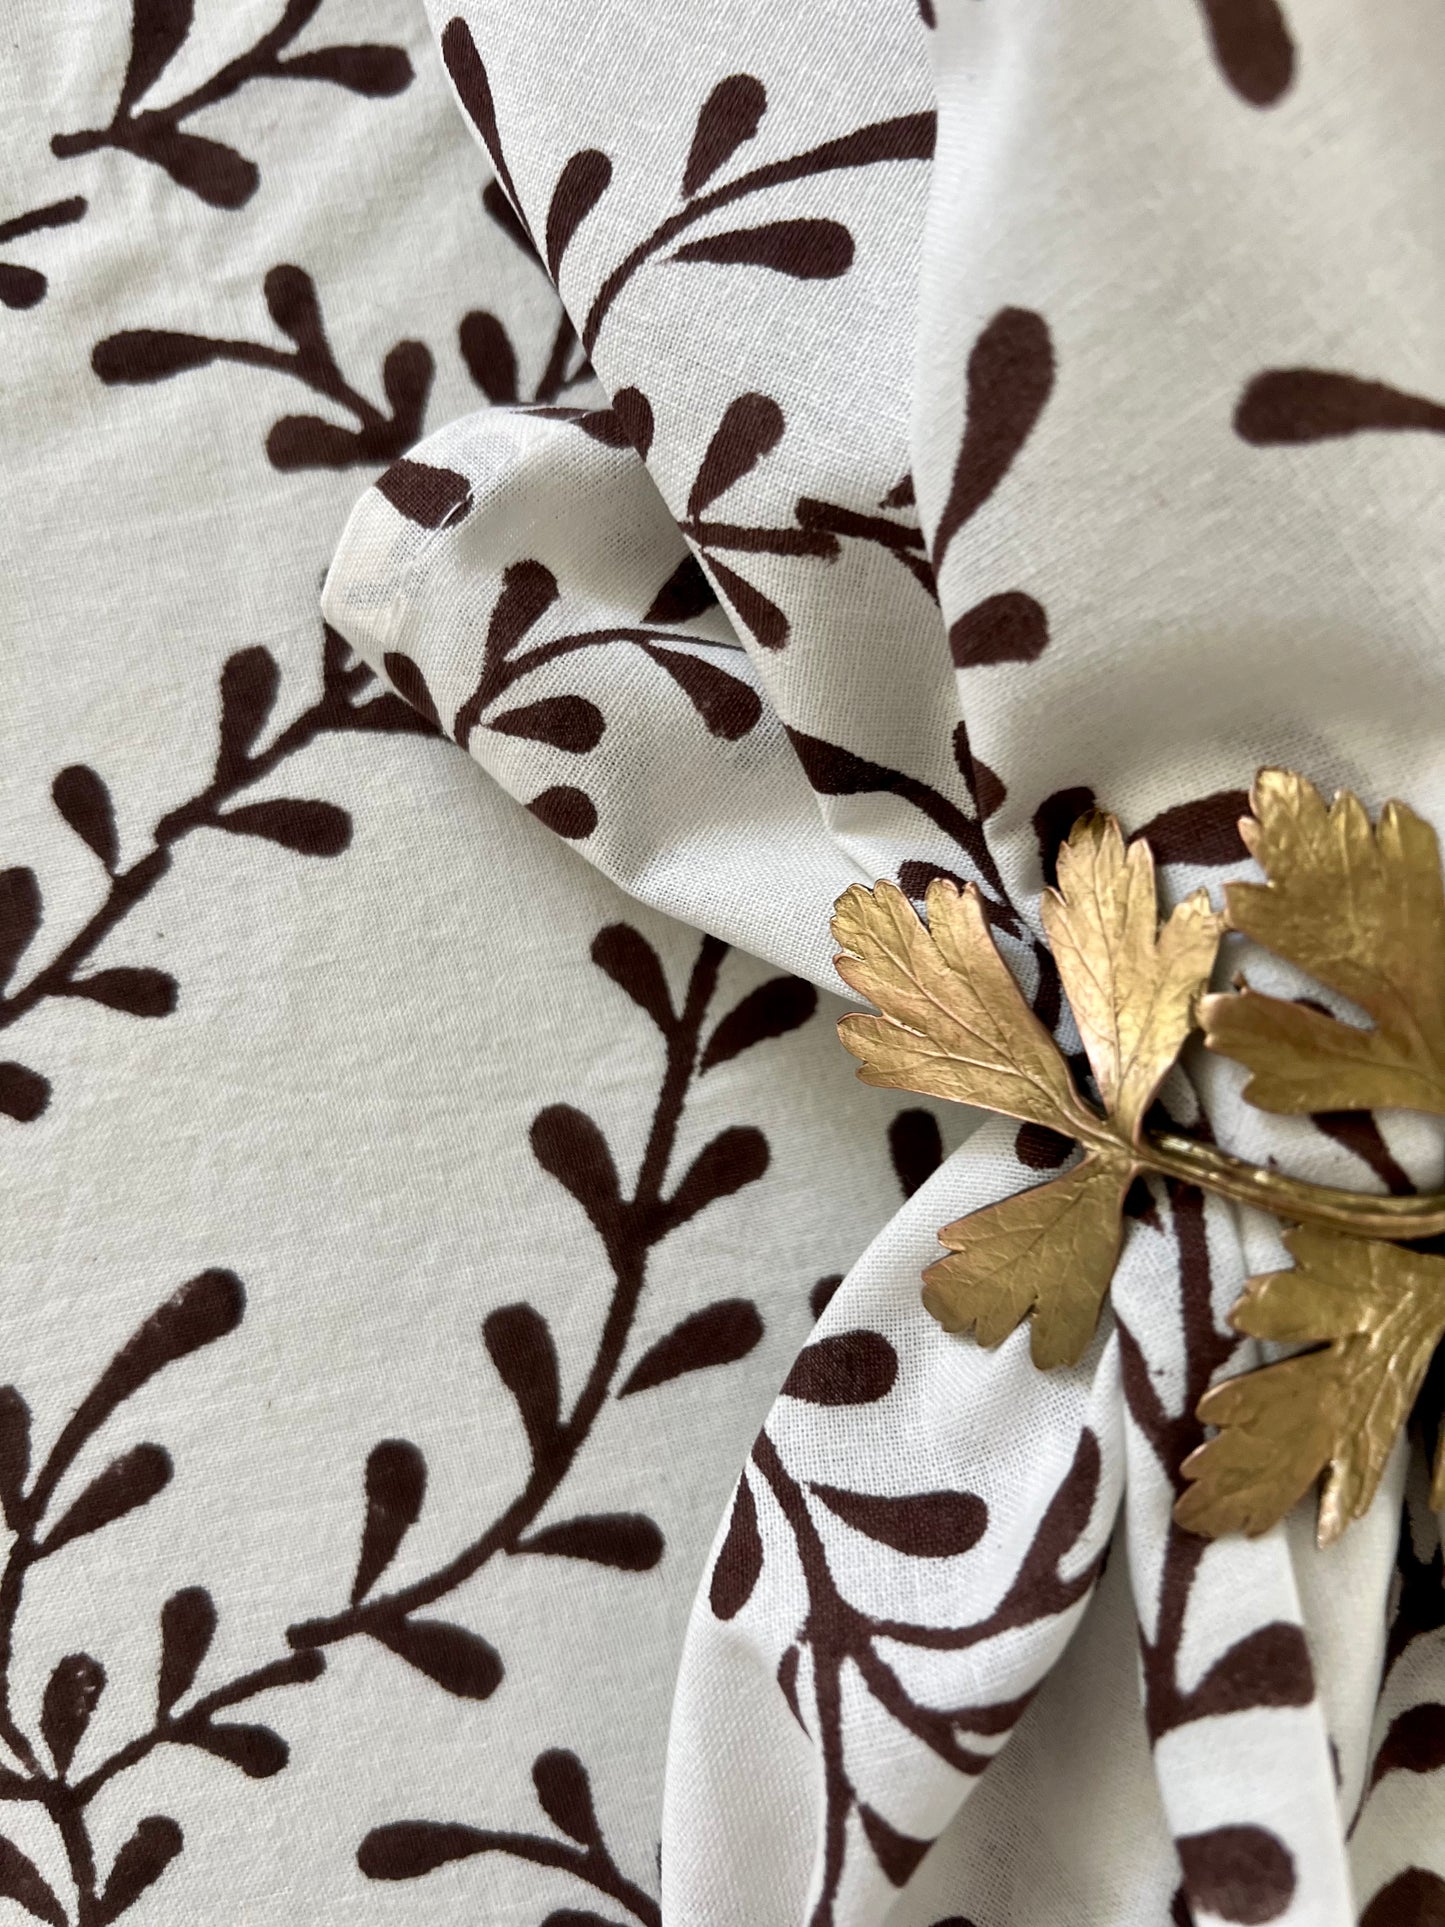 Winding Vines Tablecloth in Chocolate Brown